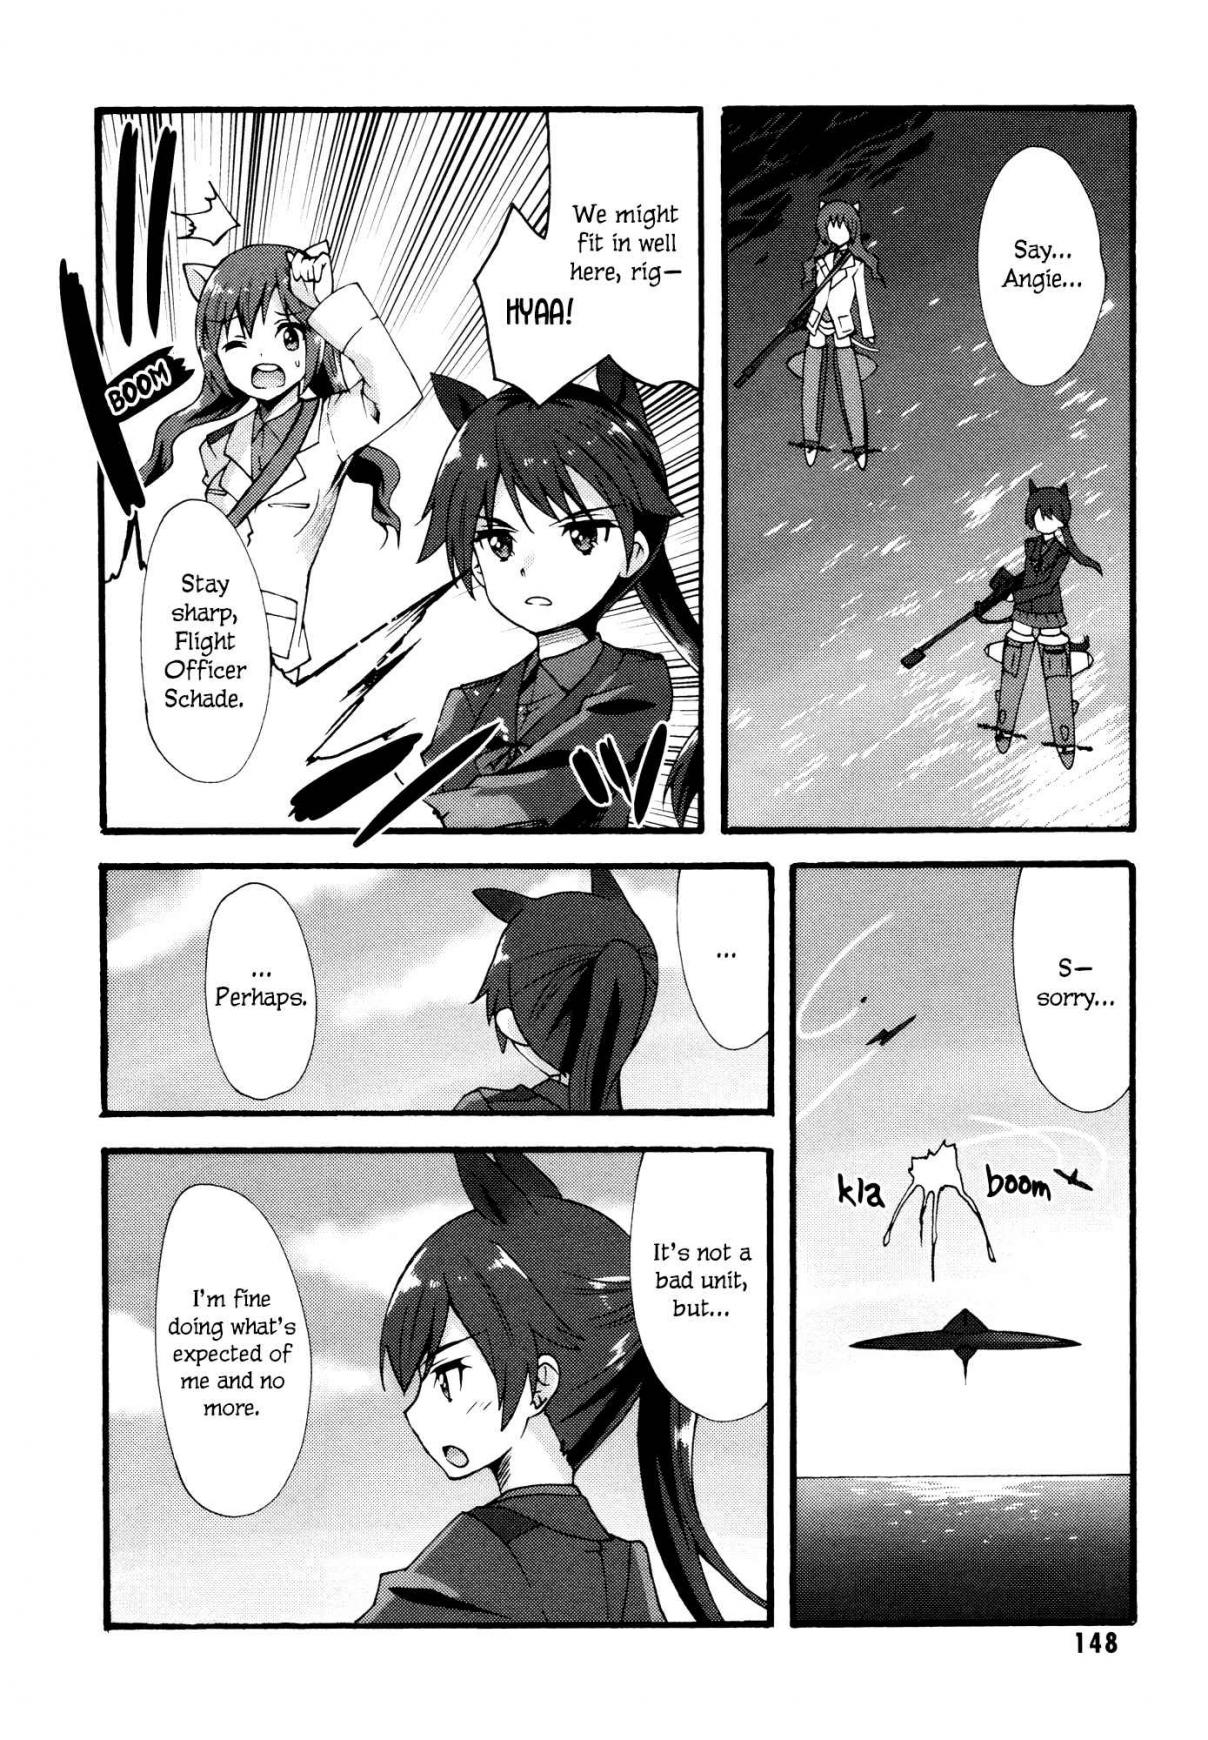 Strike Witches Red Witches Ch. 6 Two More Posts Filled (Last Part)